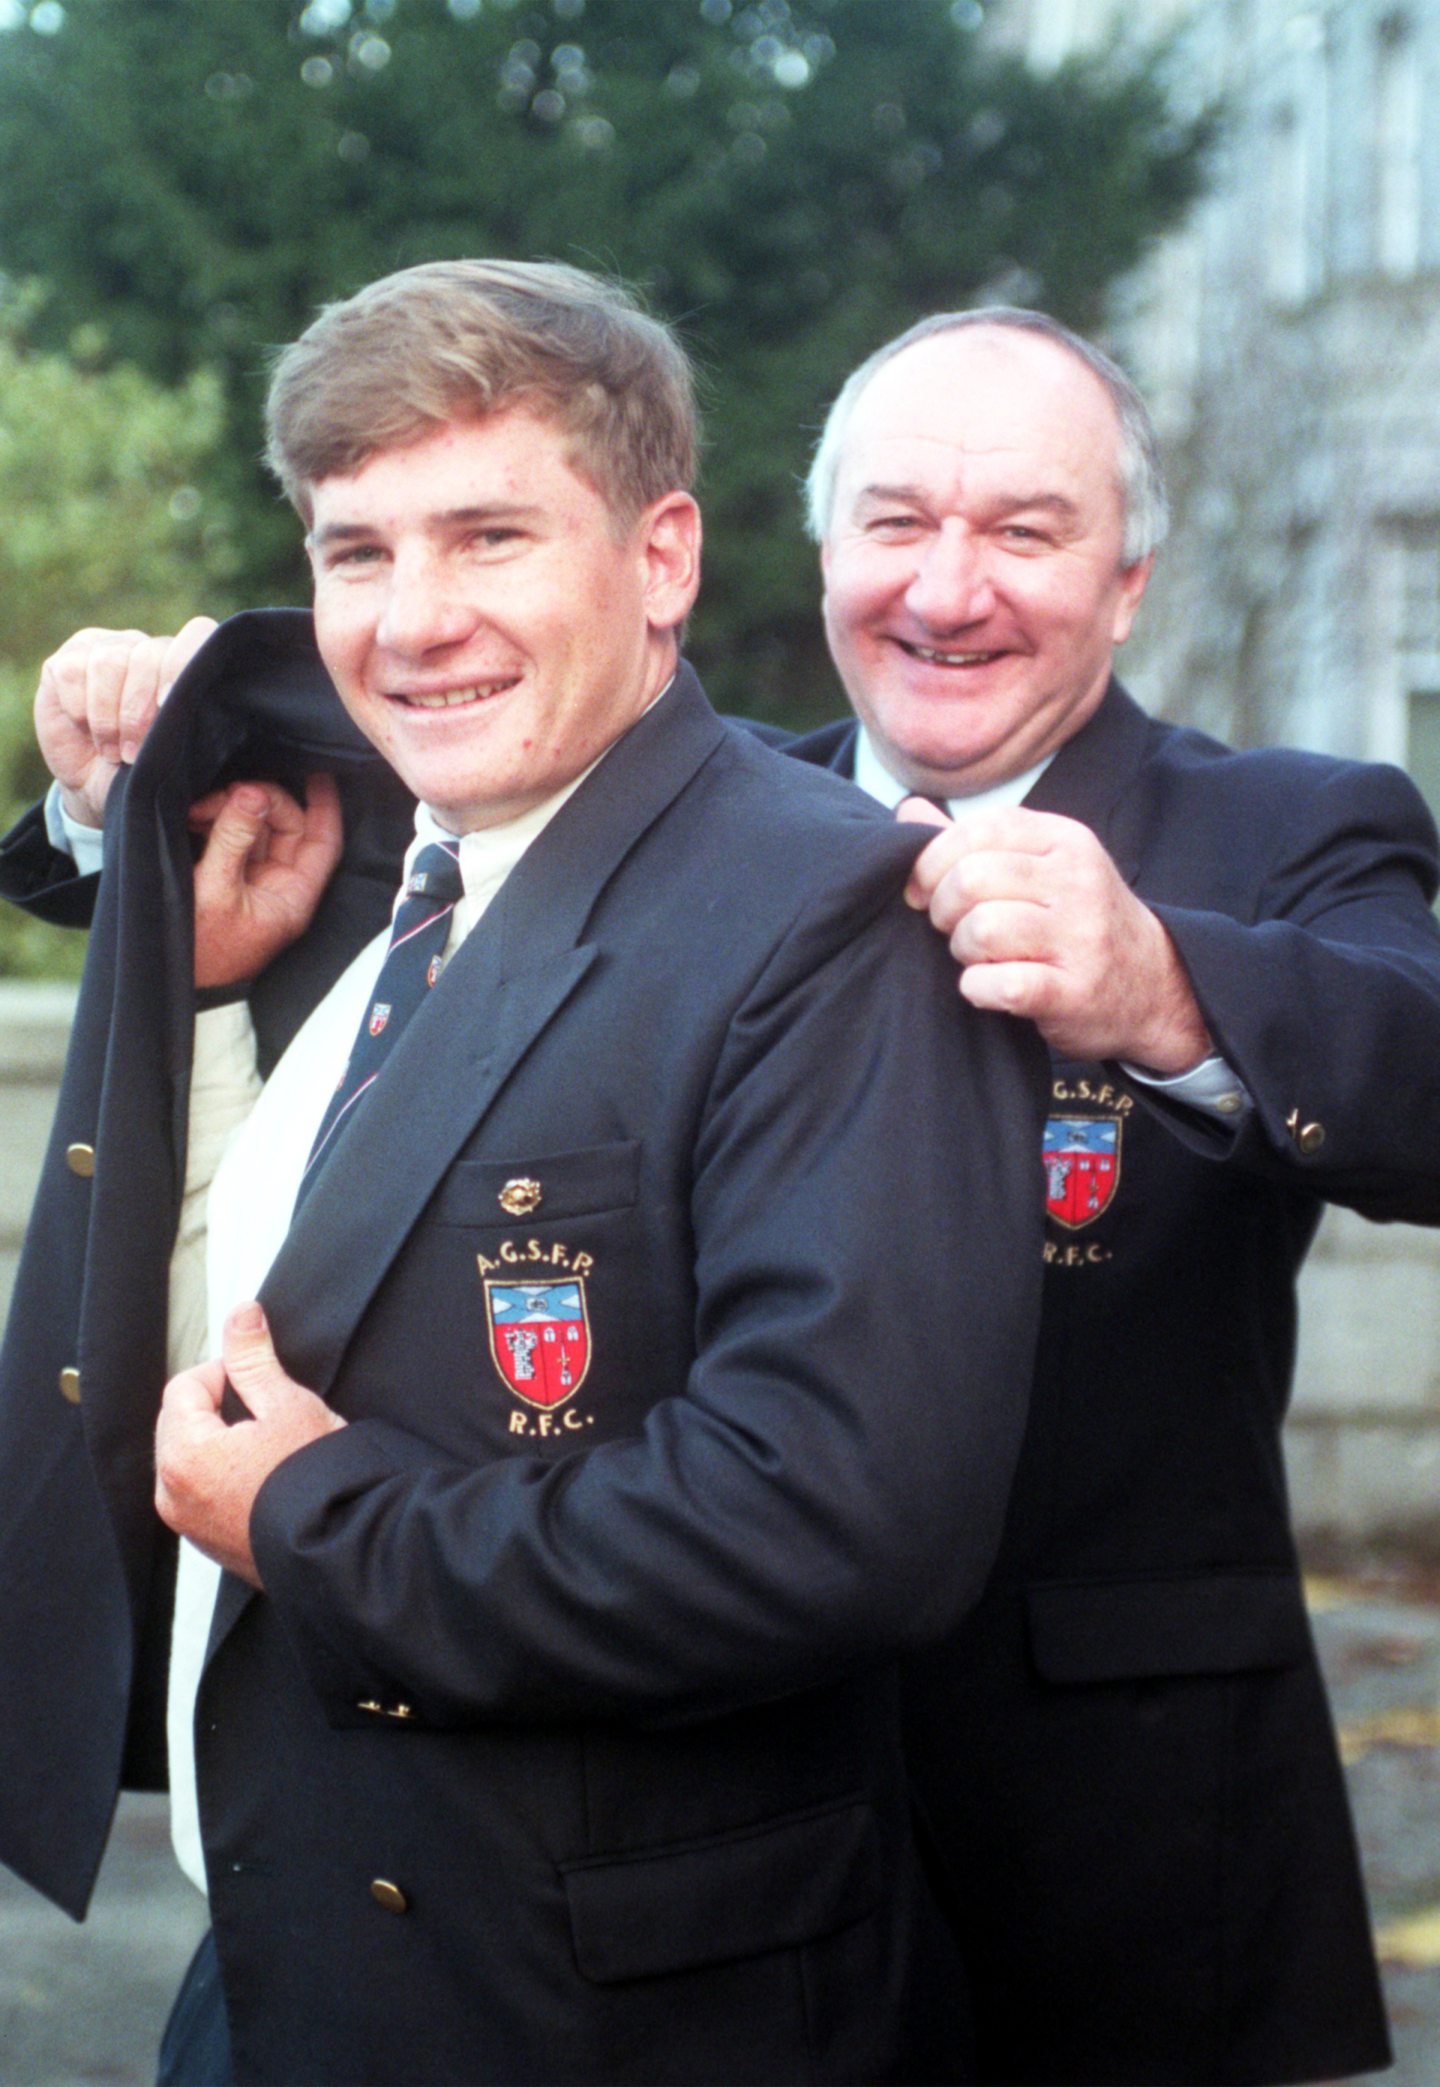  Aberdeen Grammar SChool FP Rugby Clubs new signing, Robert Russell from Australia, receives a helping hand with his blazer from coach Steve Coward in 1998.